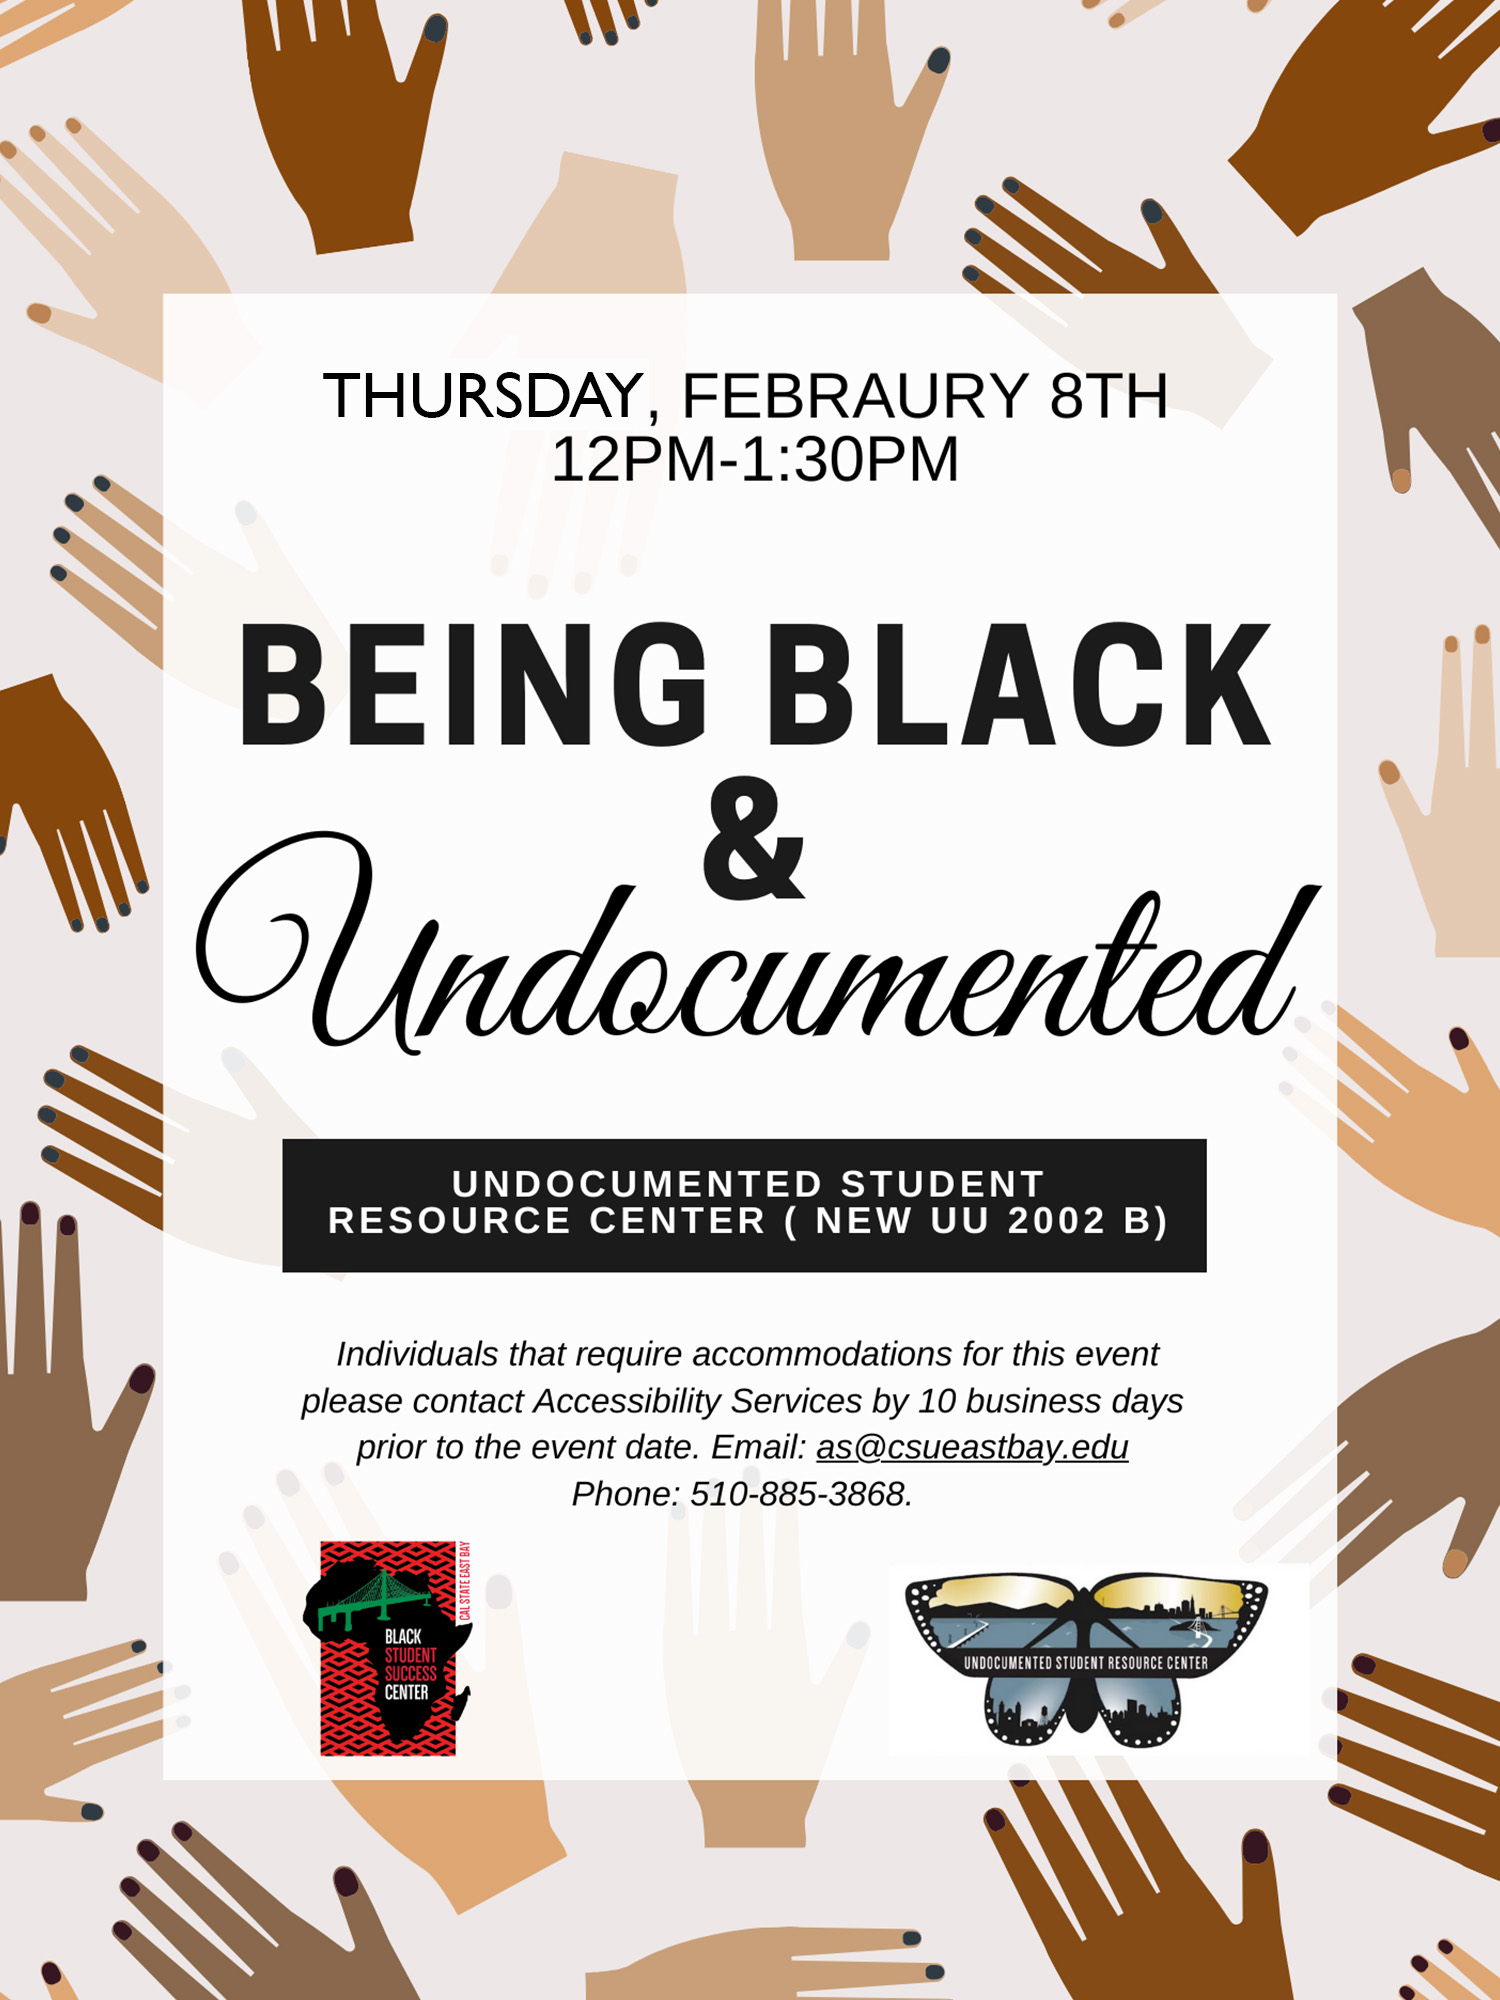 Being Black and Undocumented